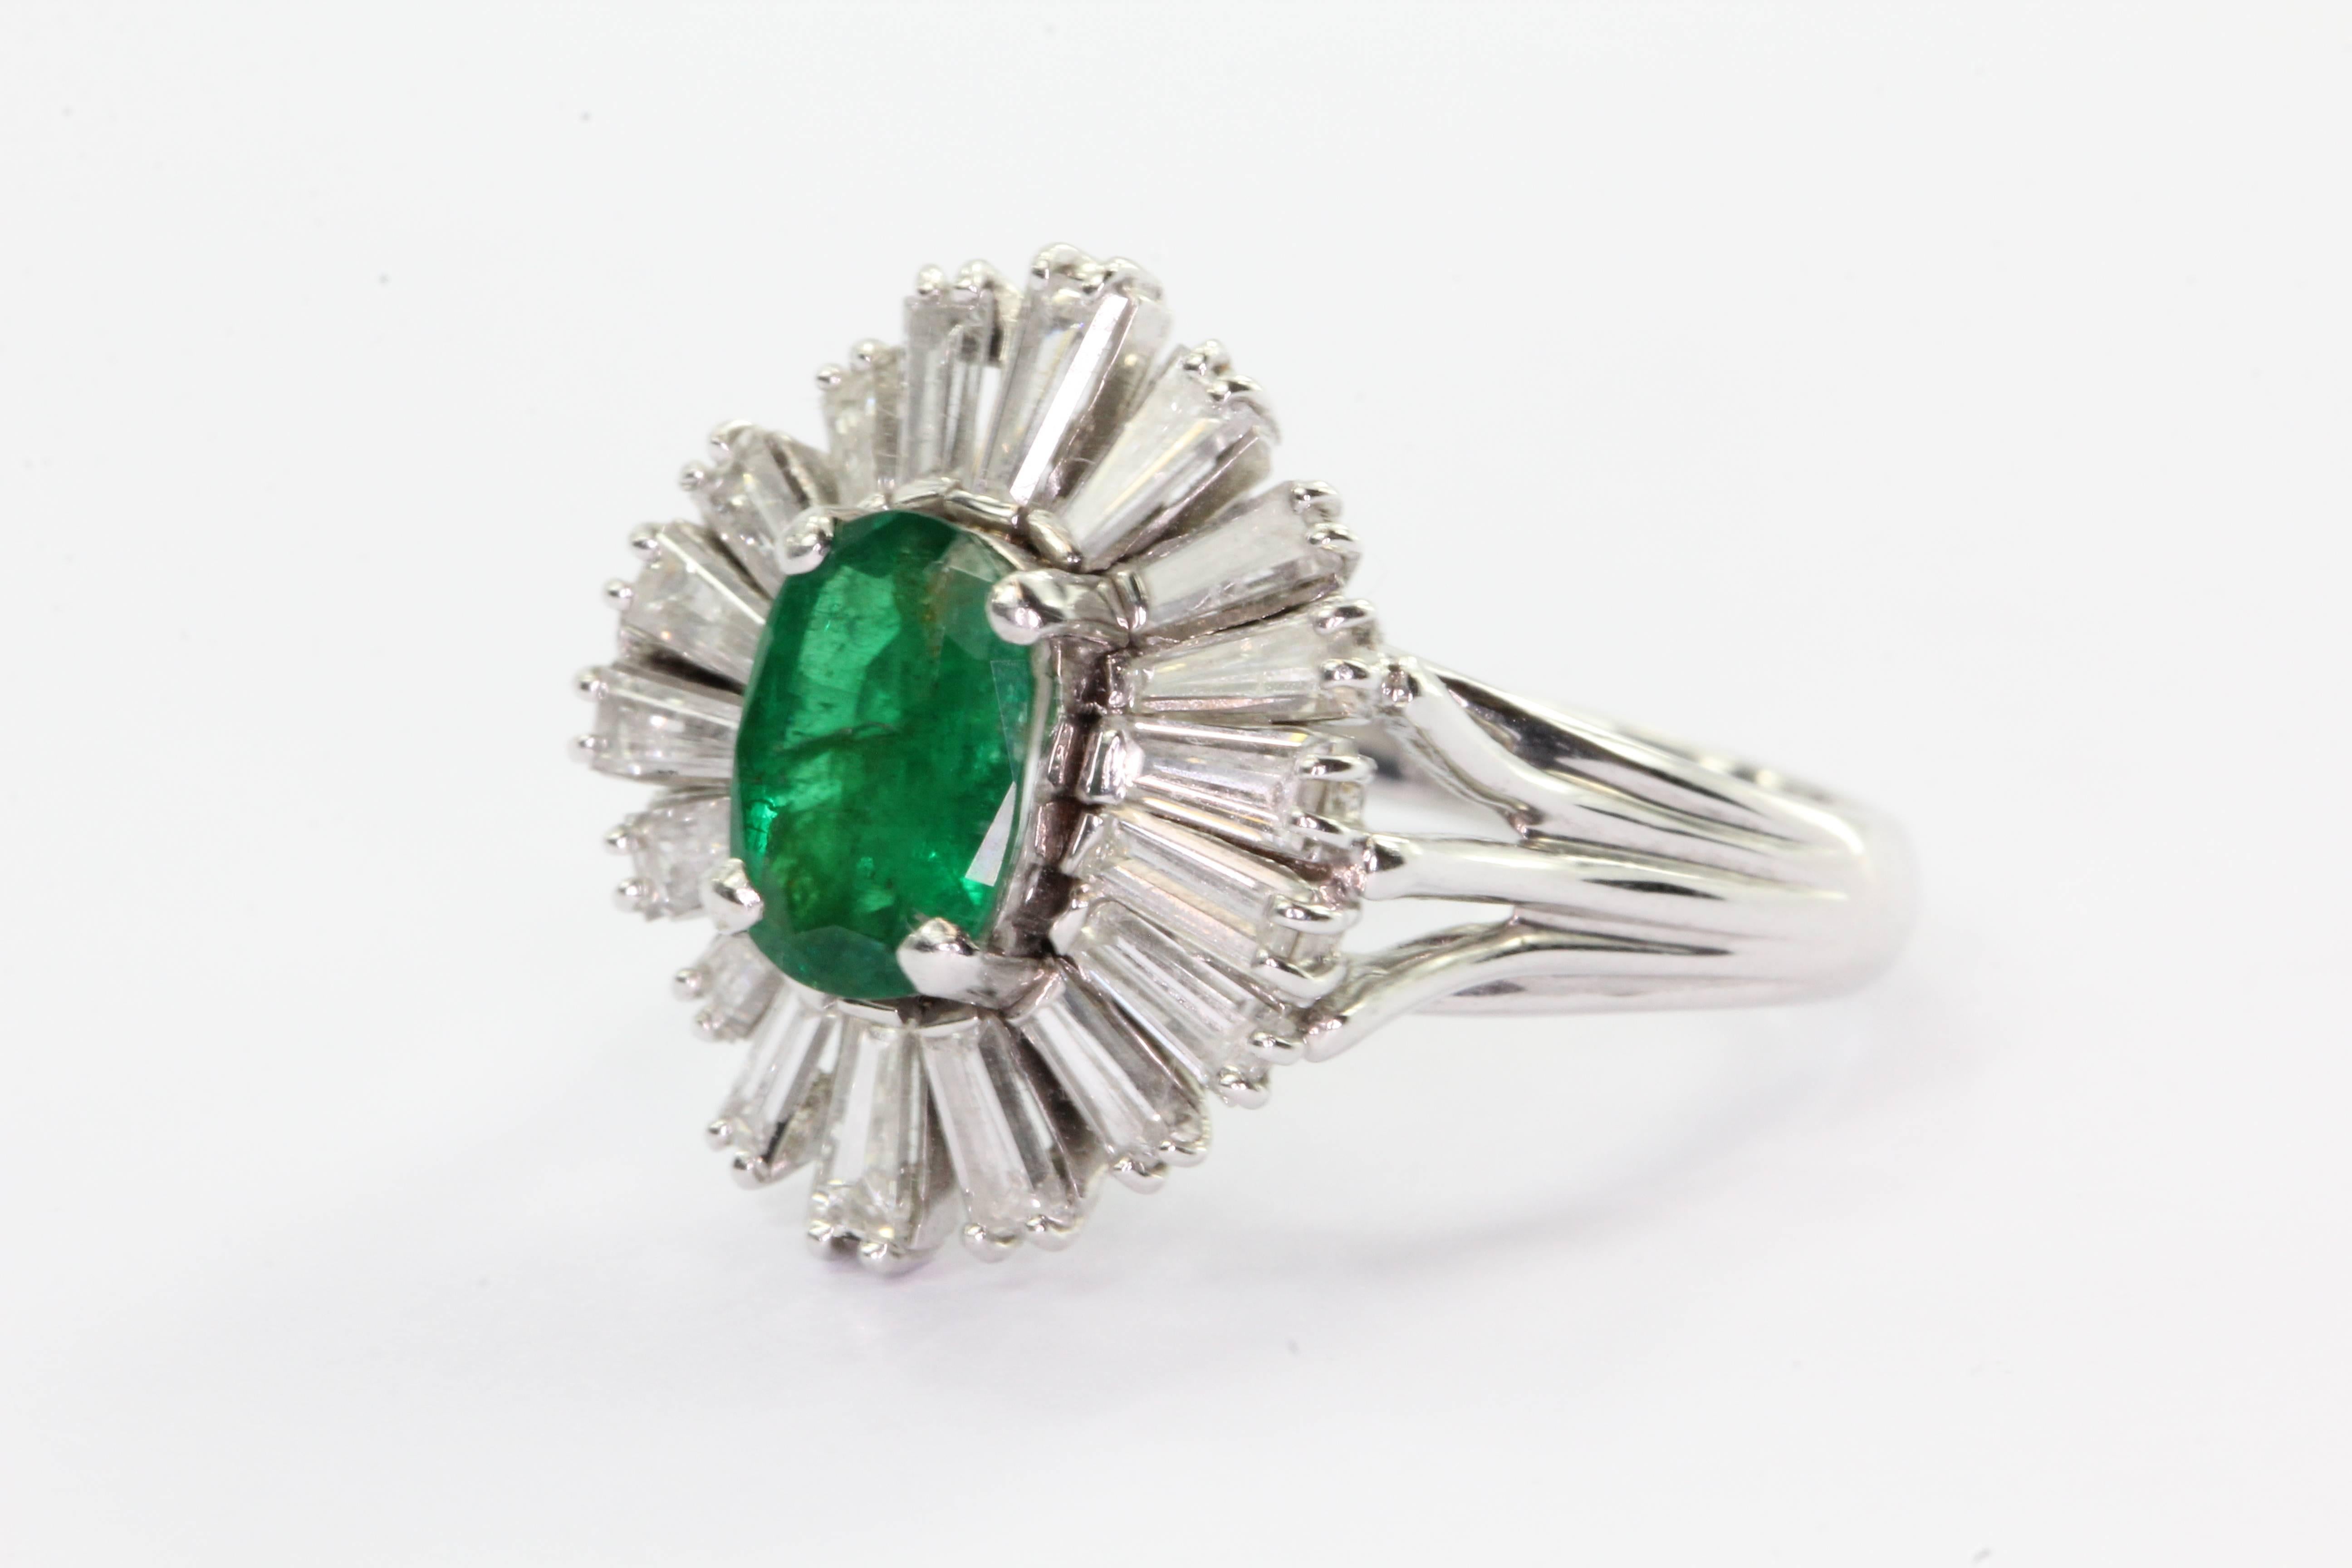 Vintage 14K White Gold Emerald & Diamond 1.2 CTW Retro Starburst Ring. The ring is in excellent estate condition and ready to wear. It is hallmarked 14K. The .80 carat oval cut emerald is completely natural. It is surrounded by a halo of